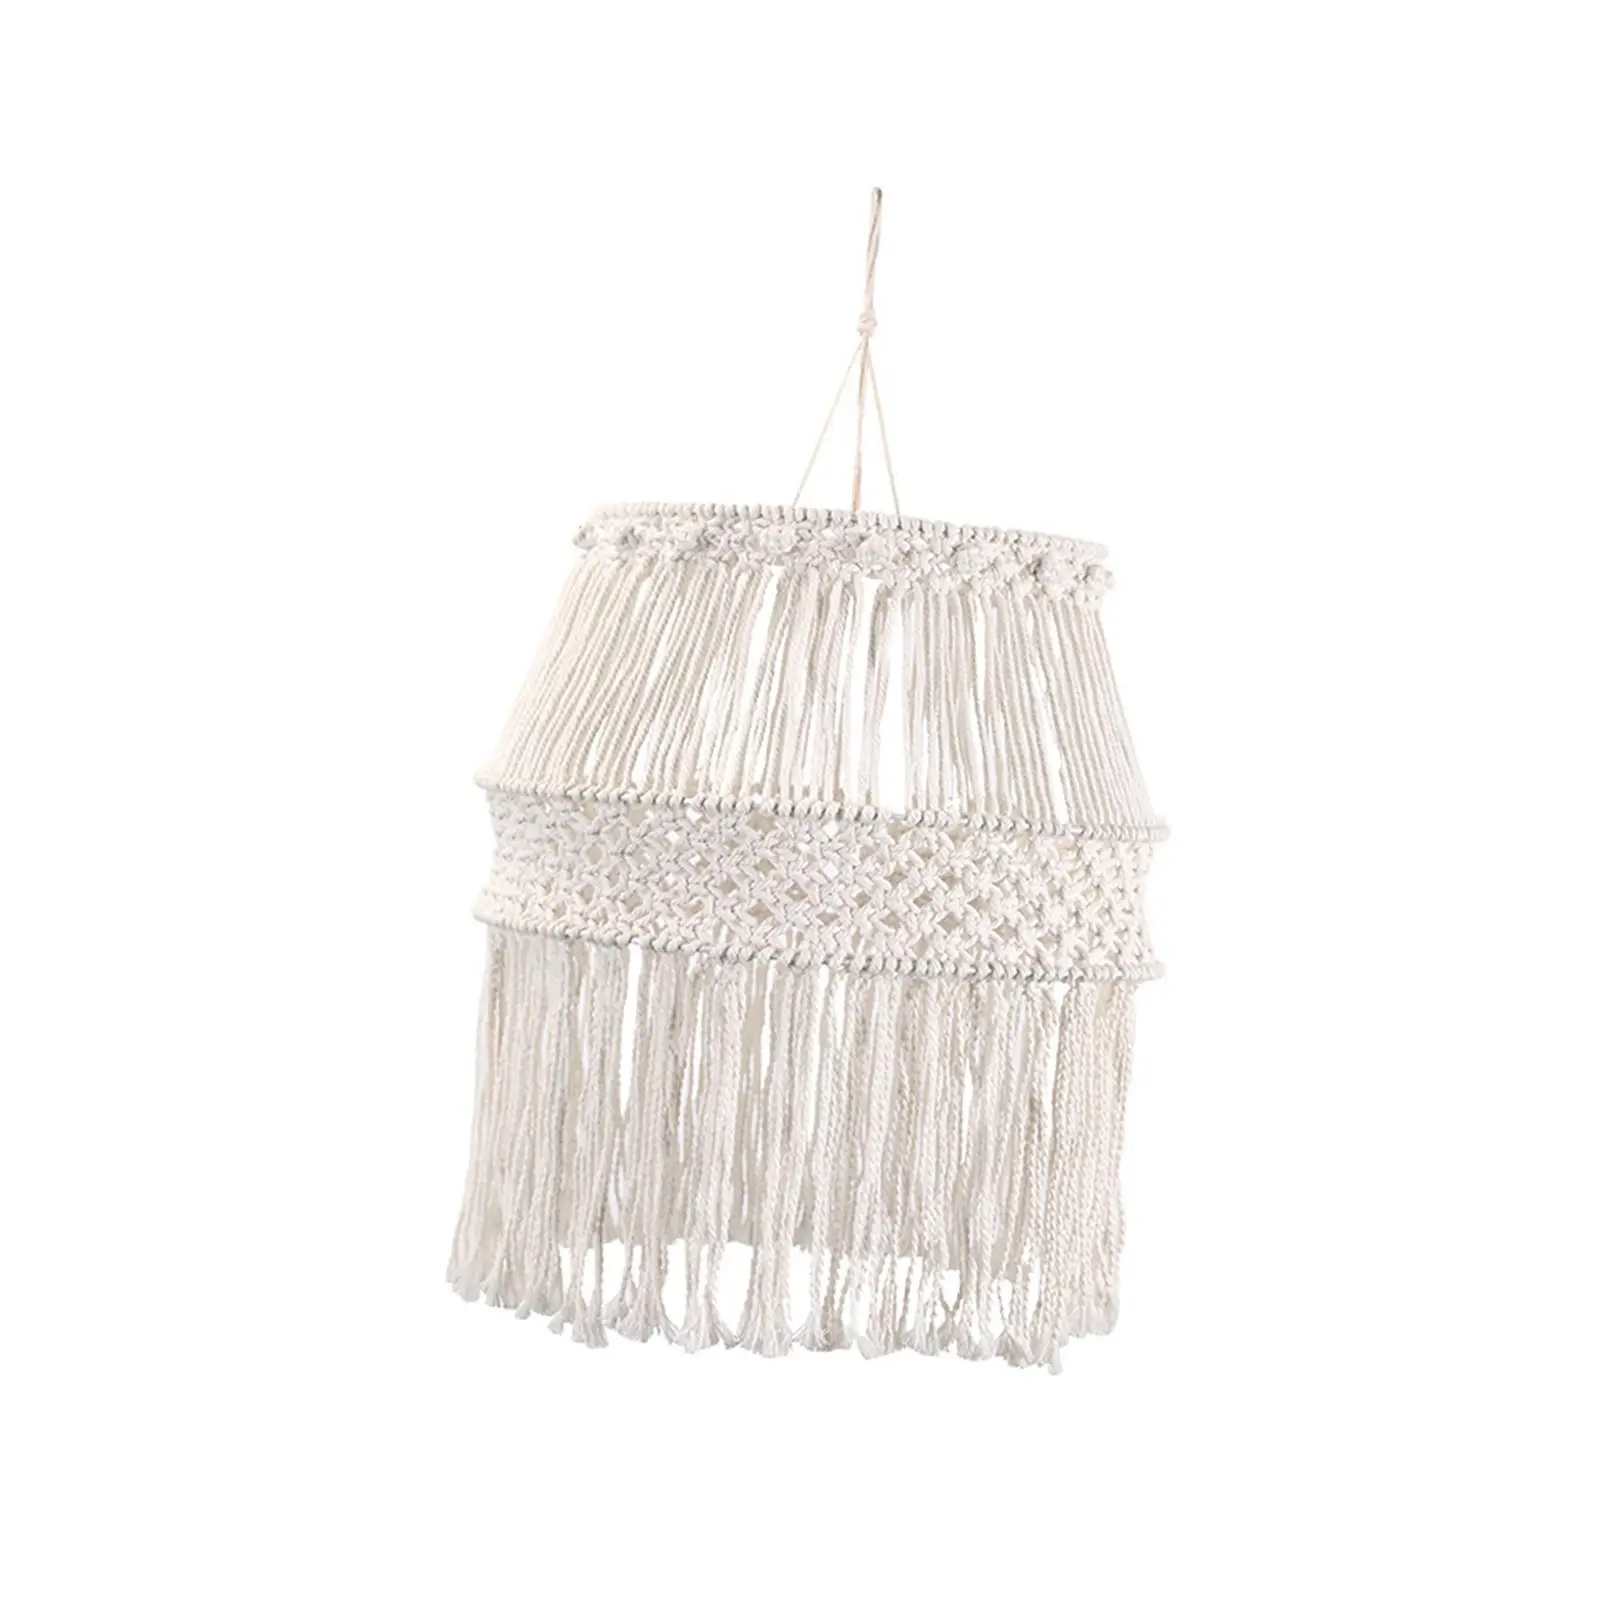 Macrame Lamp Shade Hanging Lampshade Pendant Light Shade Replacement Ceiling Light Cover for Home